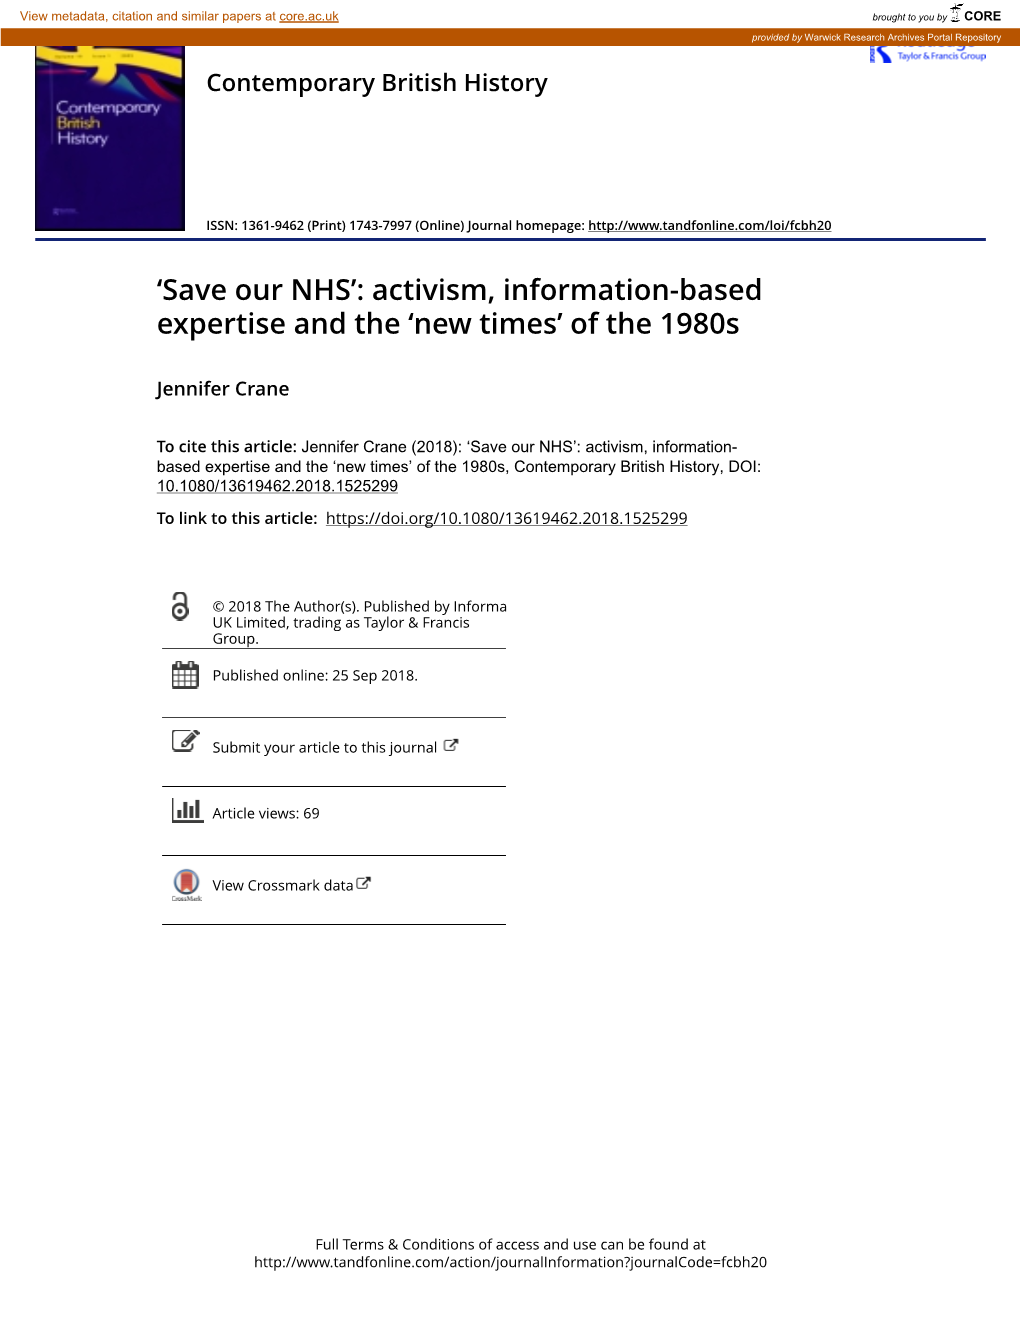 Save Our NHS’: Activism, Information-Based Expertise and the ‘New Times’ of the 1980S